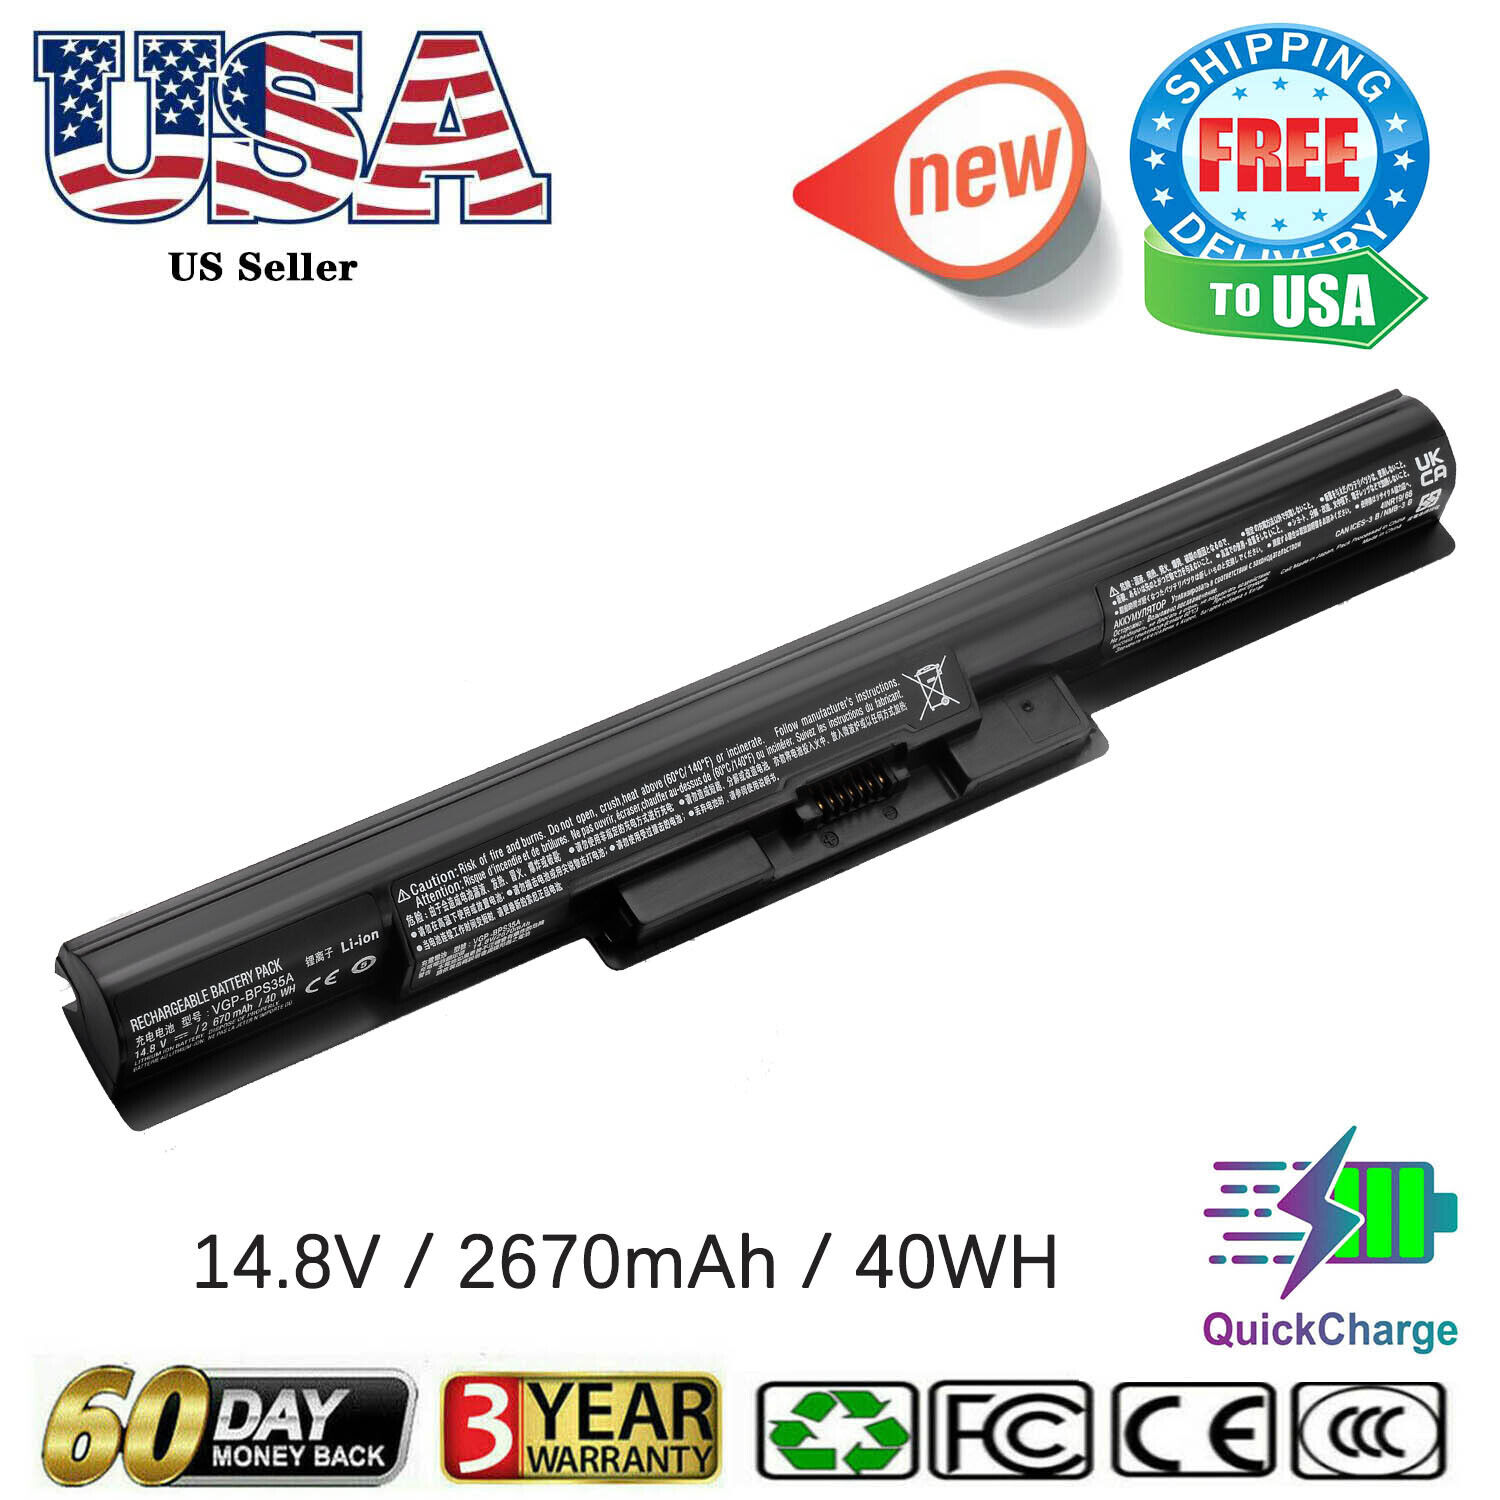 Rechargable Battery Pack VGP-BPS35A 14.8V 40Wh for SONY Vaio Fit 14E 15E NEW